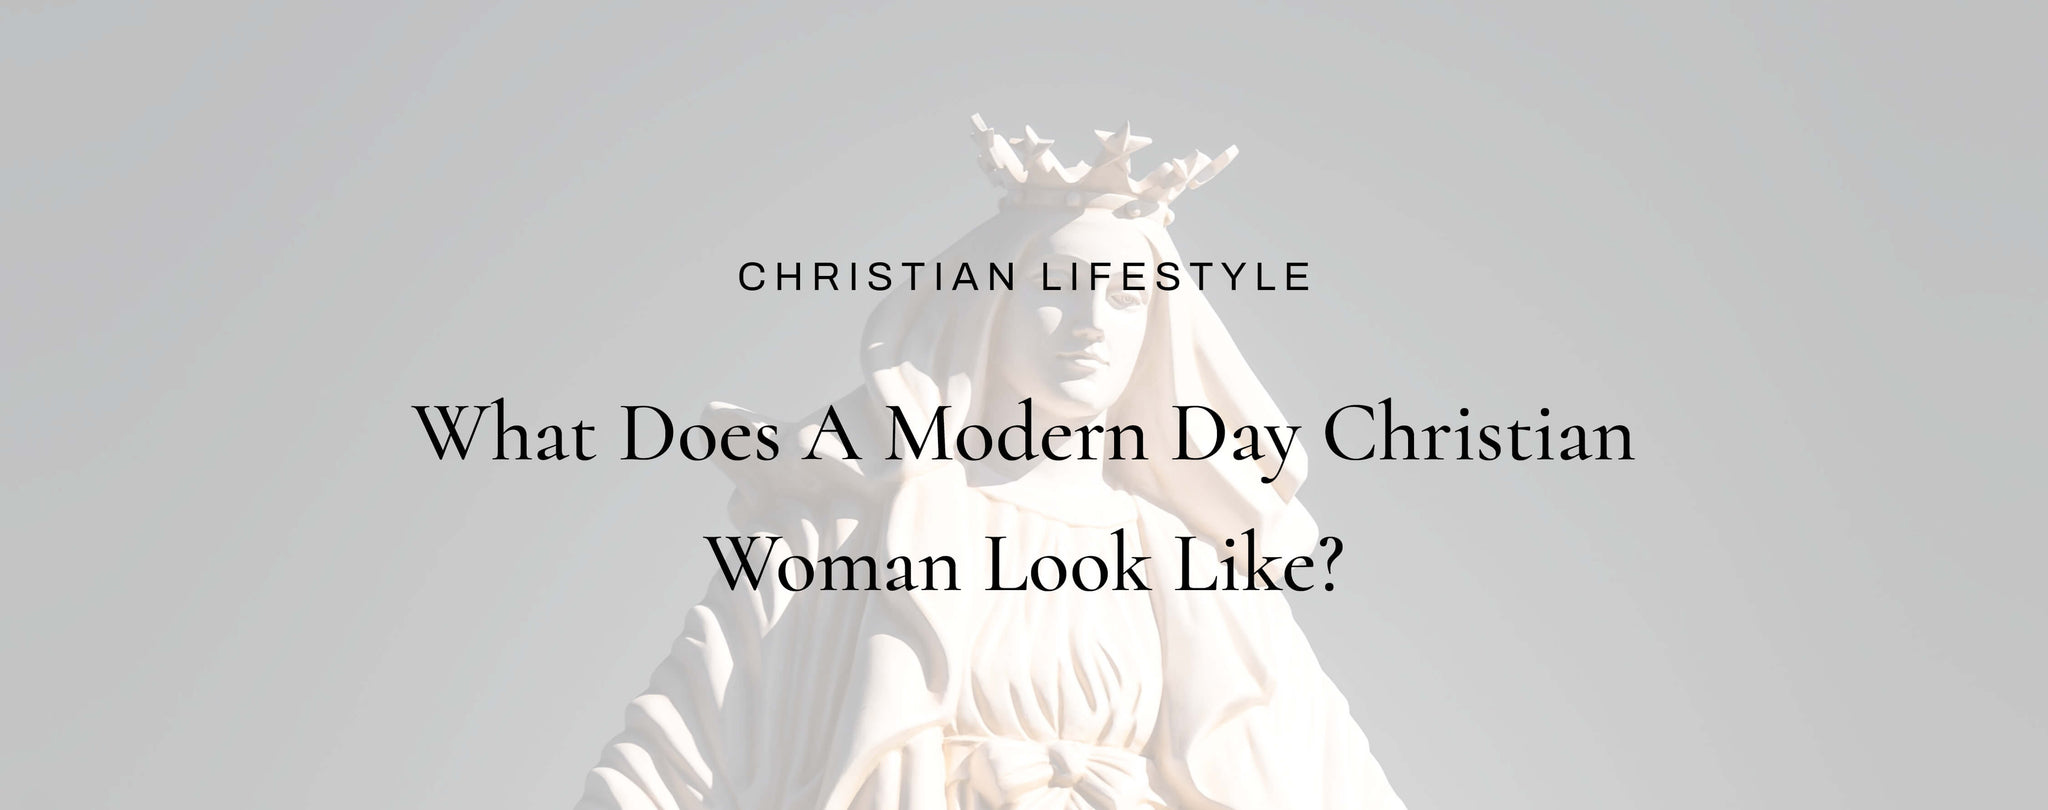 What Does a Modern Day Christian Woman Look Like?